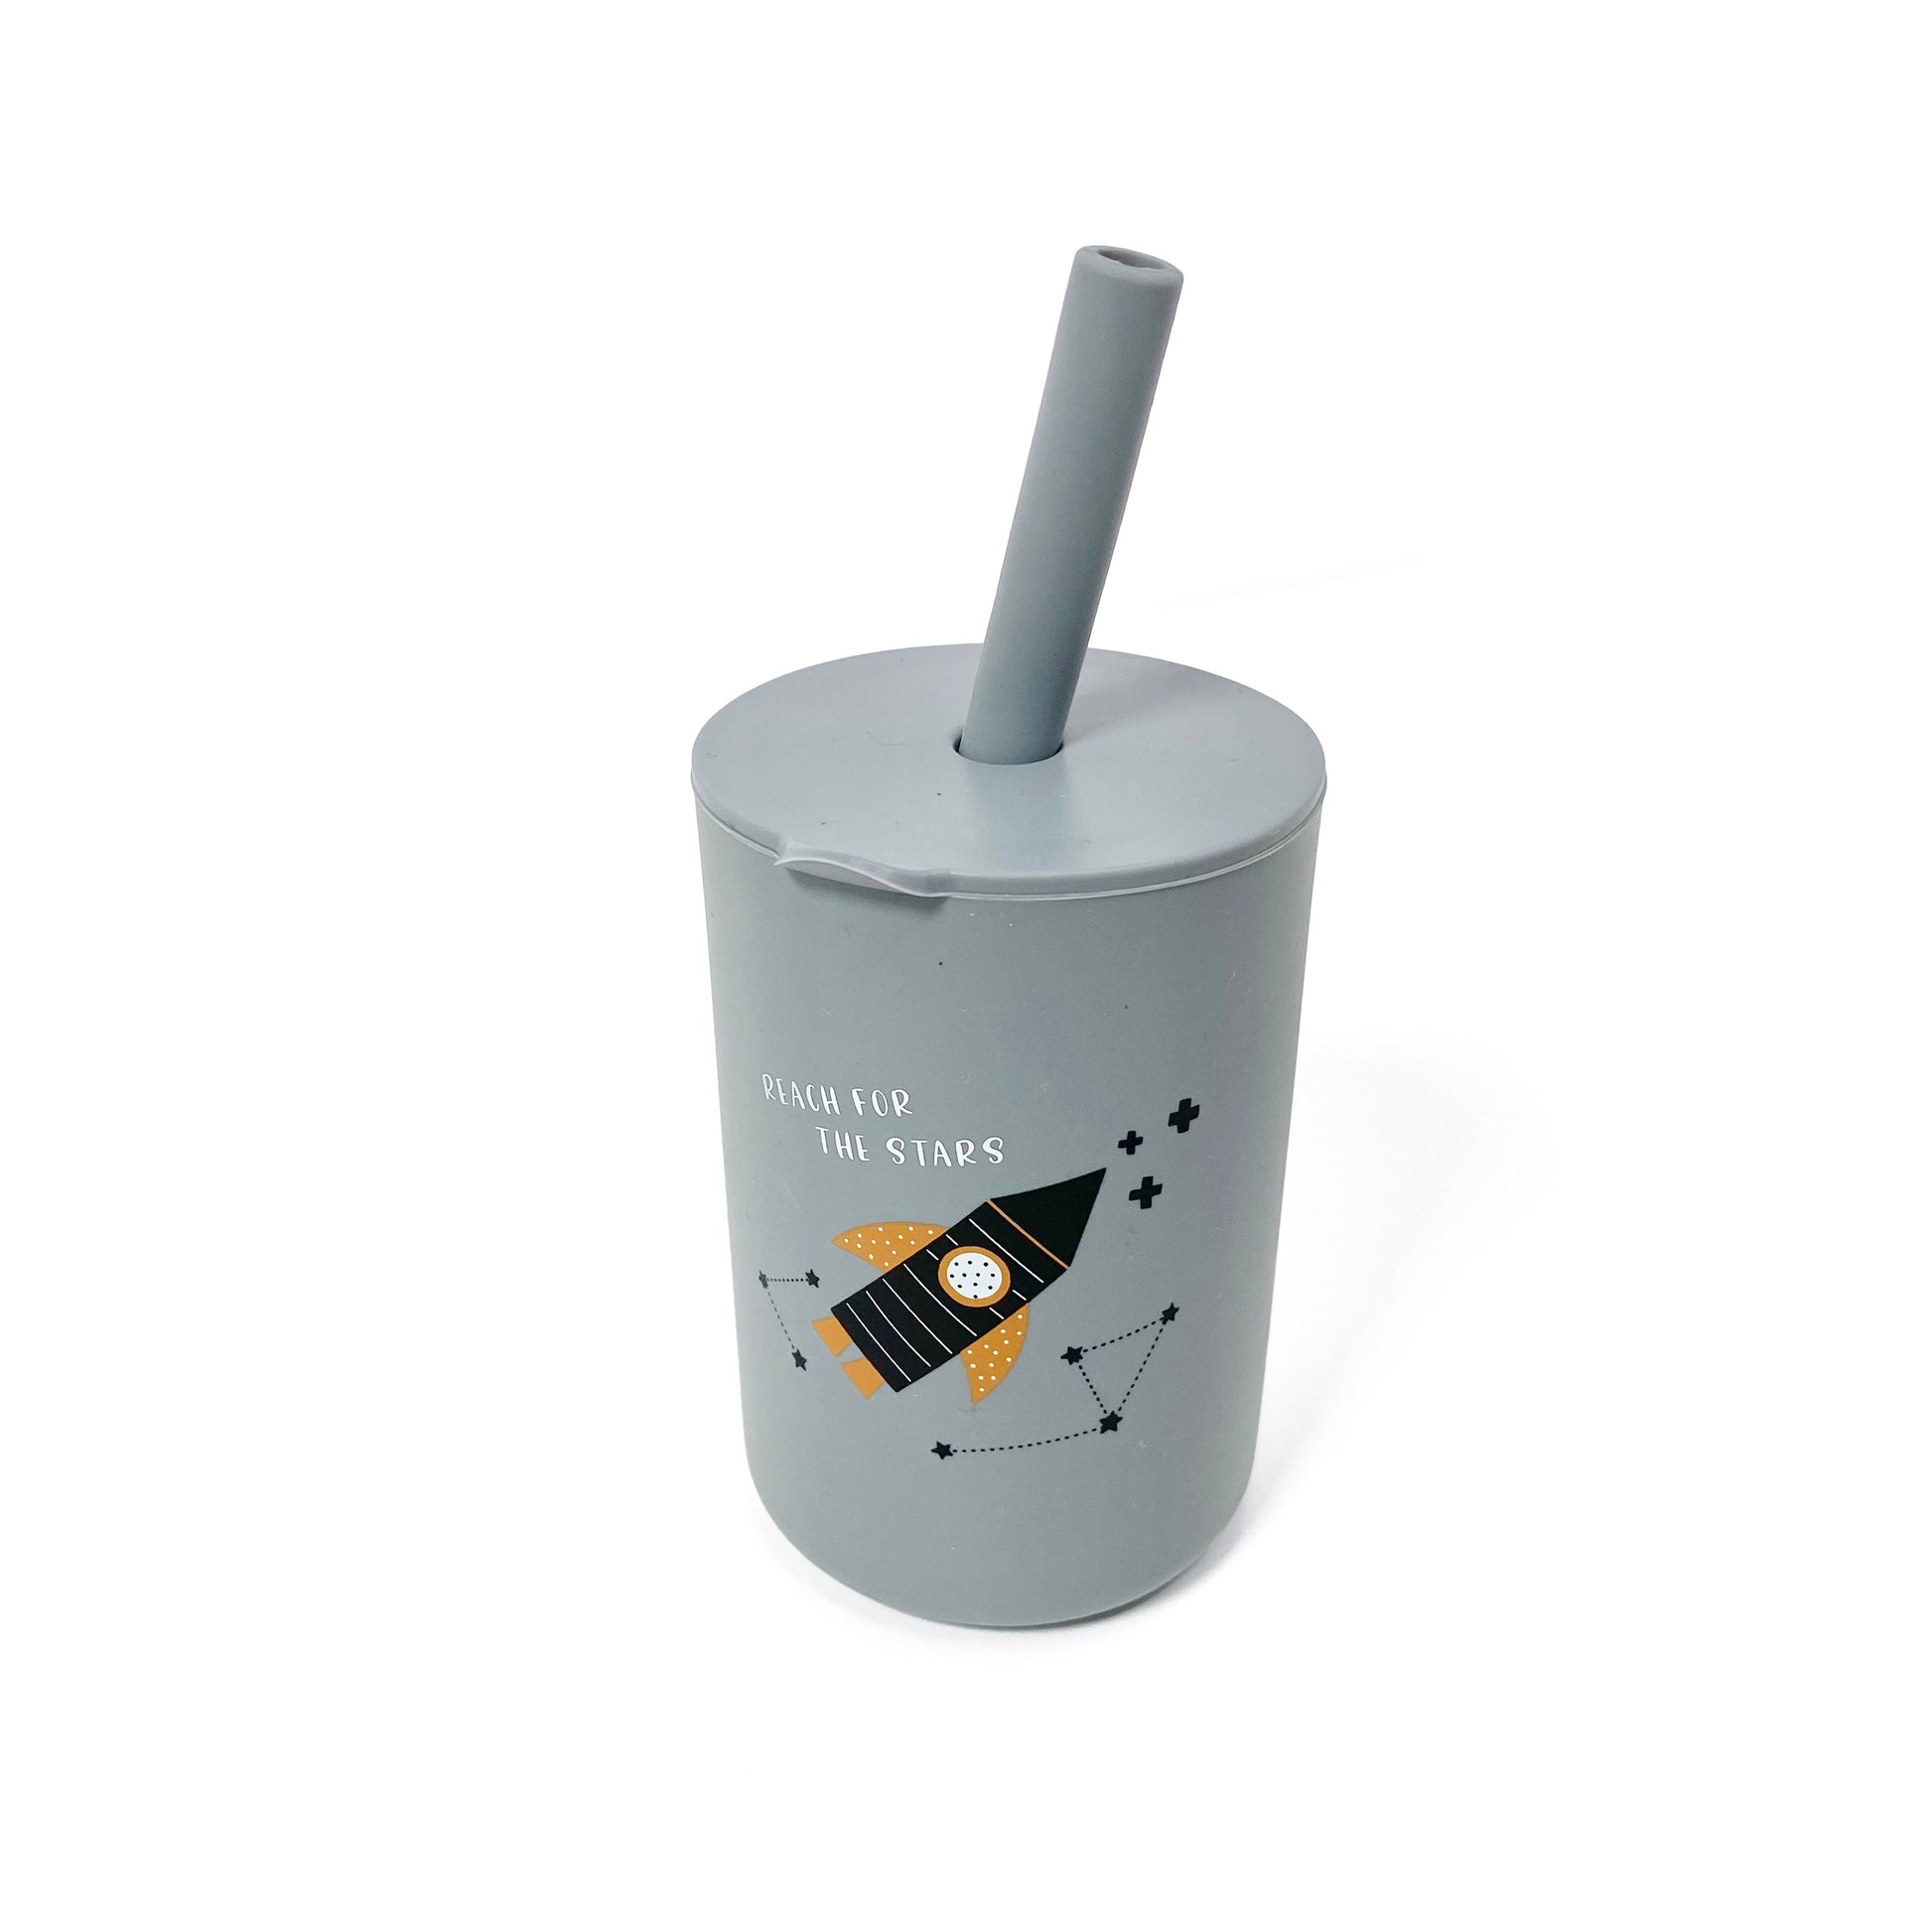 A children’s grey silicone drinking cup, with matching lid and straw, featuring a rocket design. The image shows the cup with lid and straw attached.